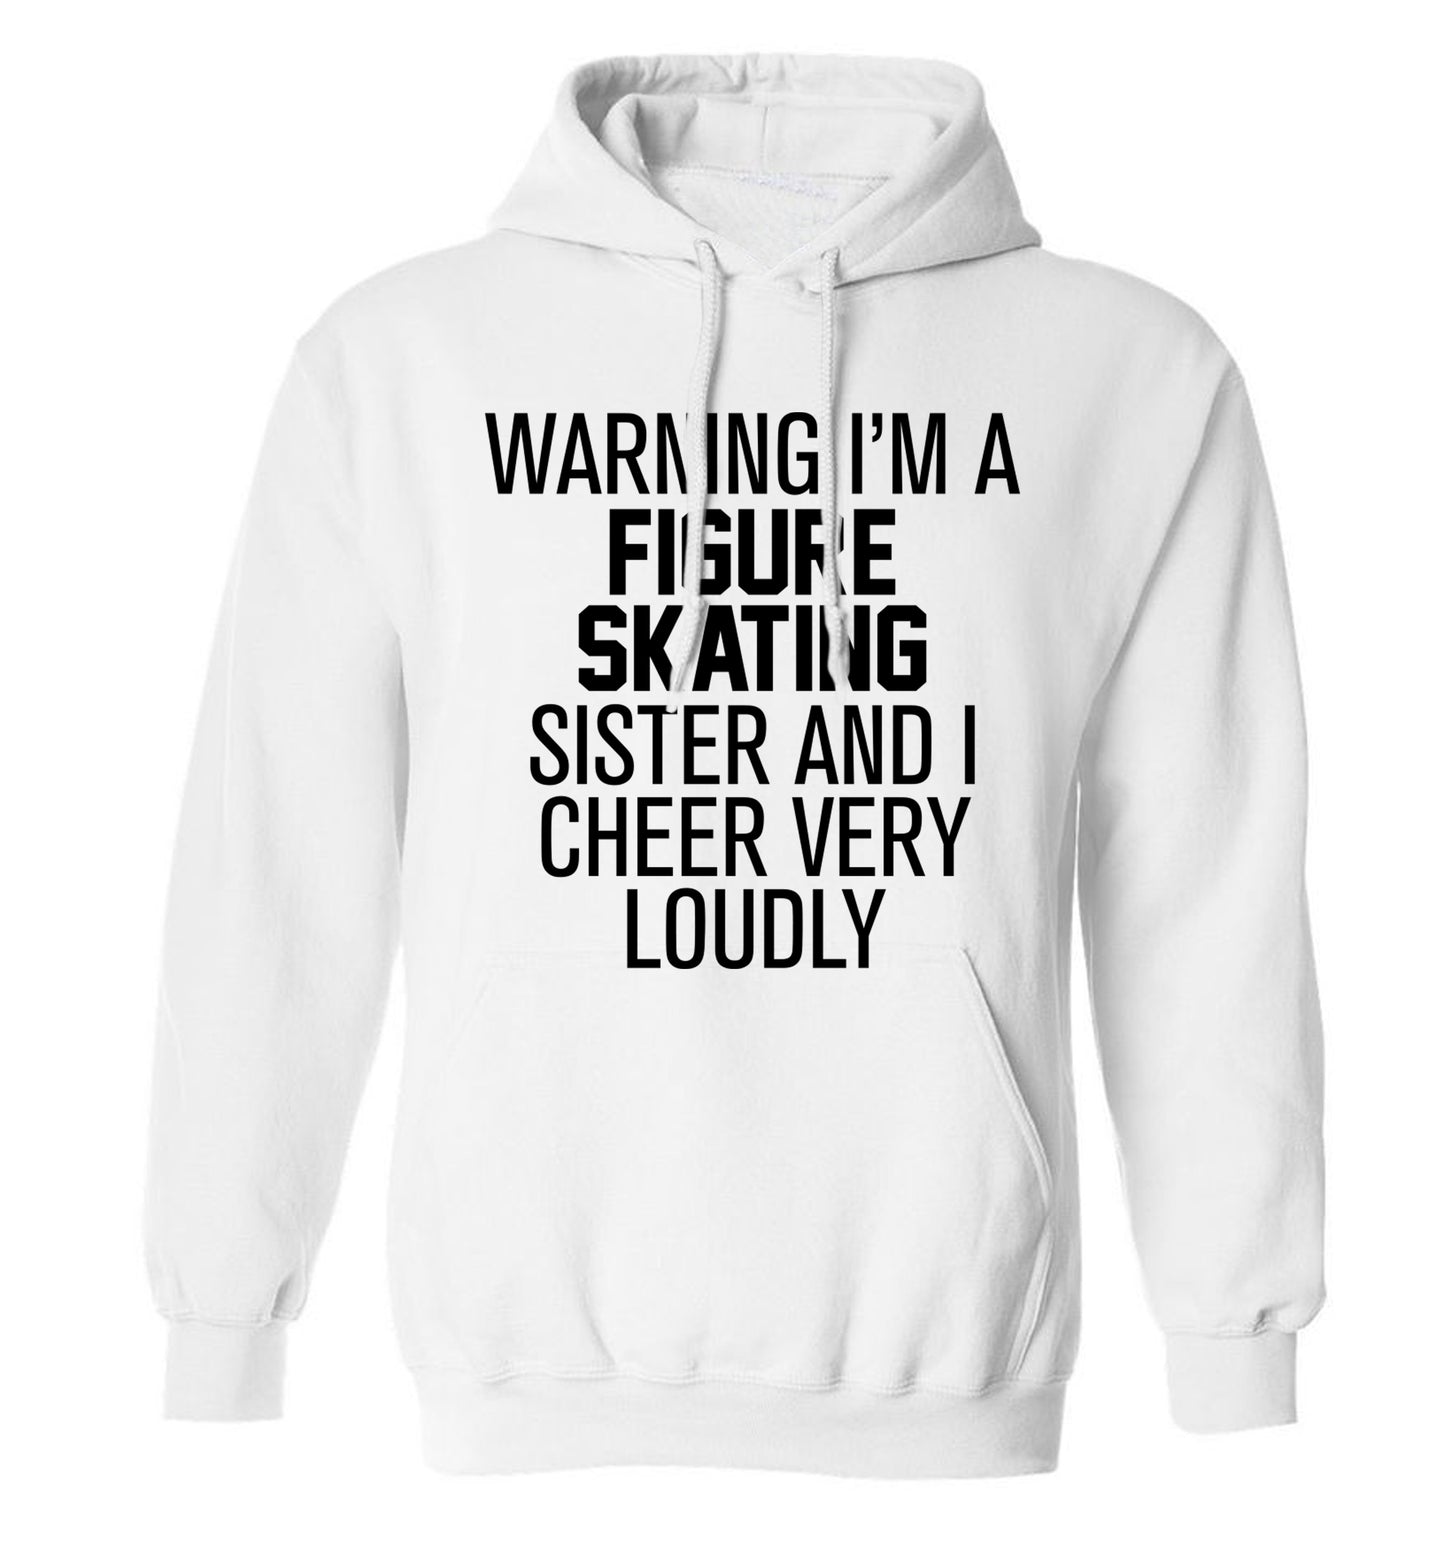 Warning I'm a figure skating sister and I cheer very loudly adults unisexwhite hoodie 2XL